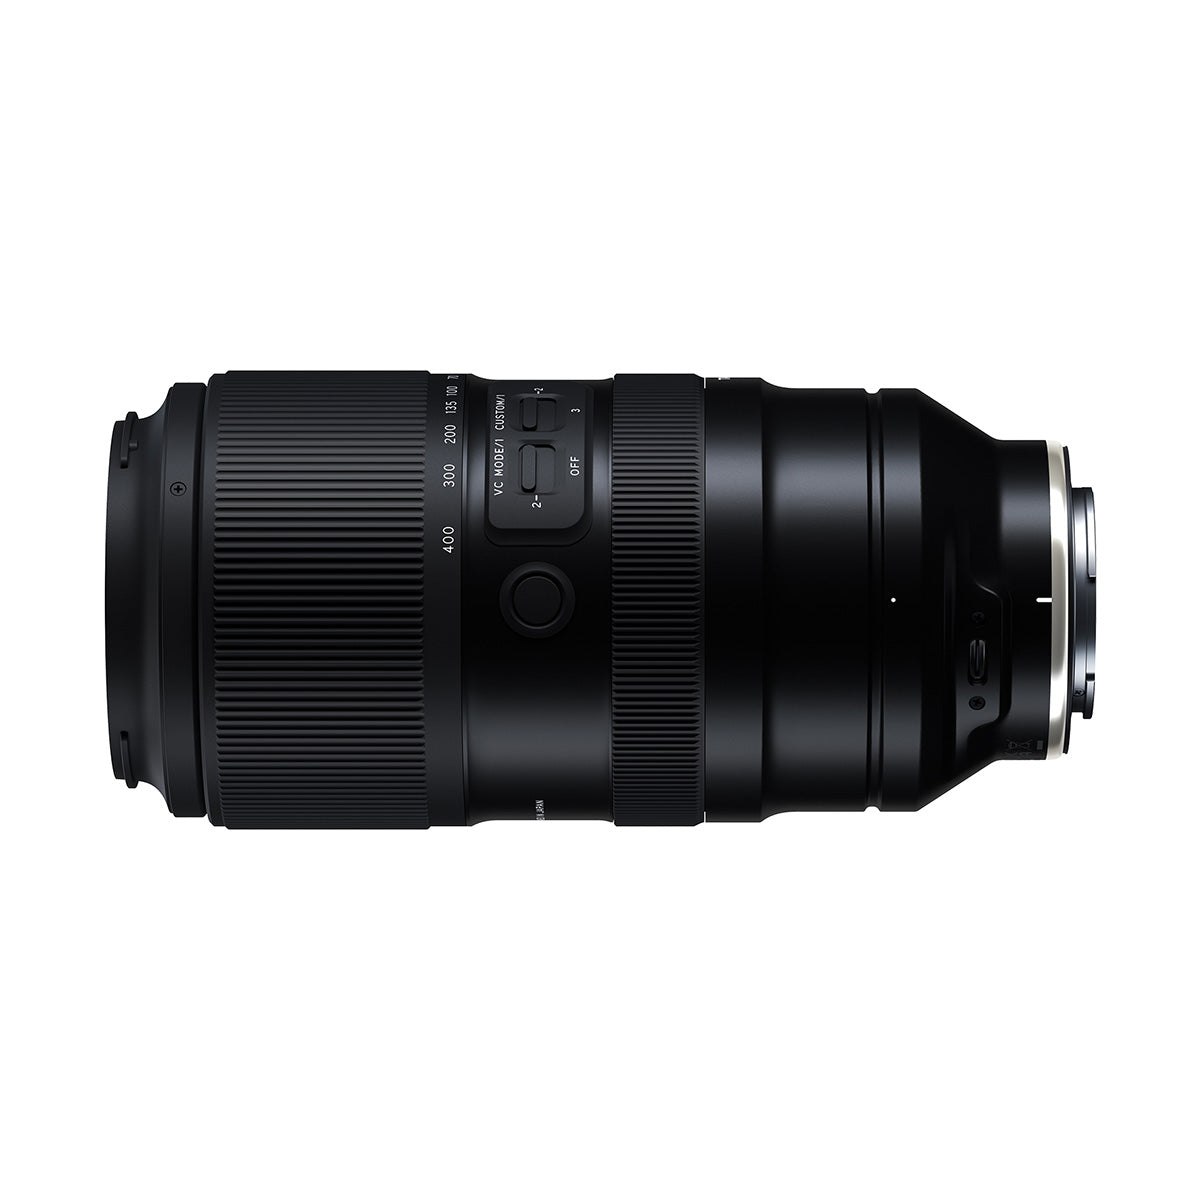 Tamron 50-400mm F/4.5-6.3 Di III VC VXD Lens for Sony FE